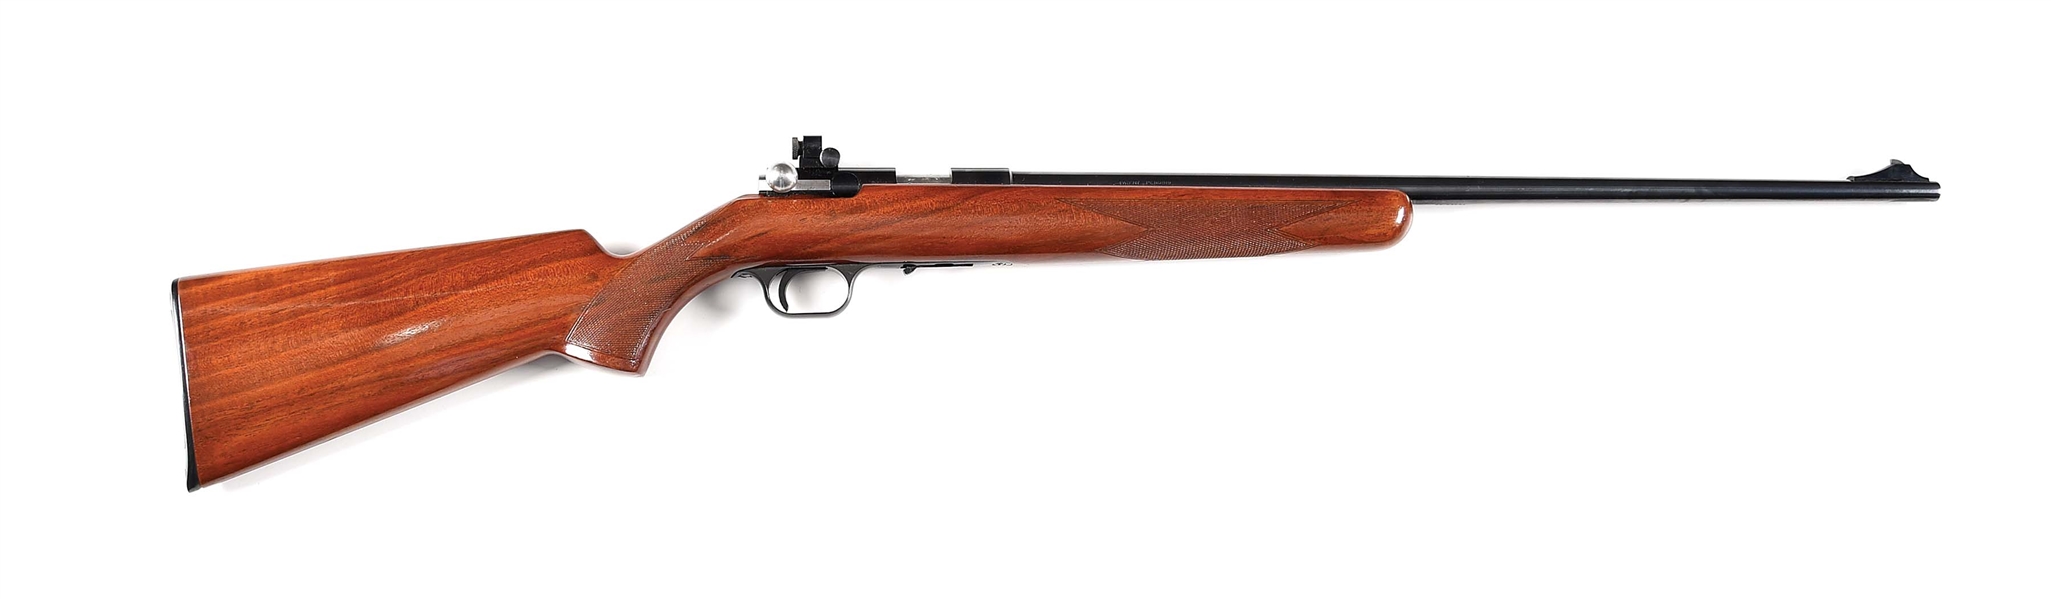 (M) BROWNING MODEL T2 .22 LR STRAIGHT PULL BOLT ACTION RIFLE.